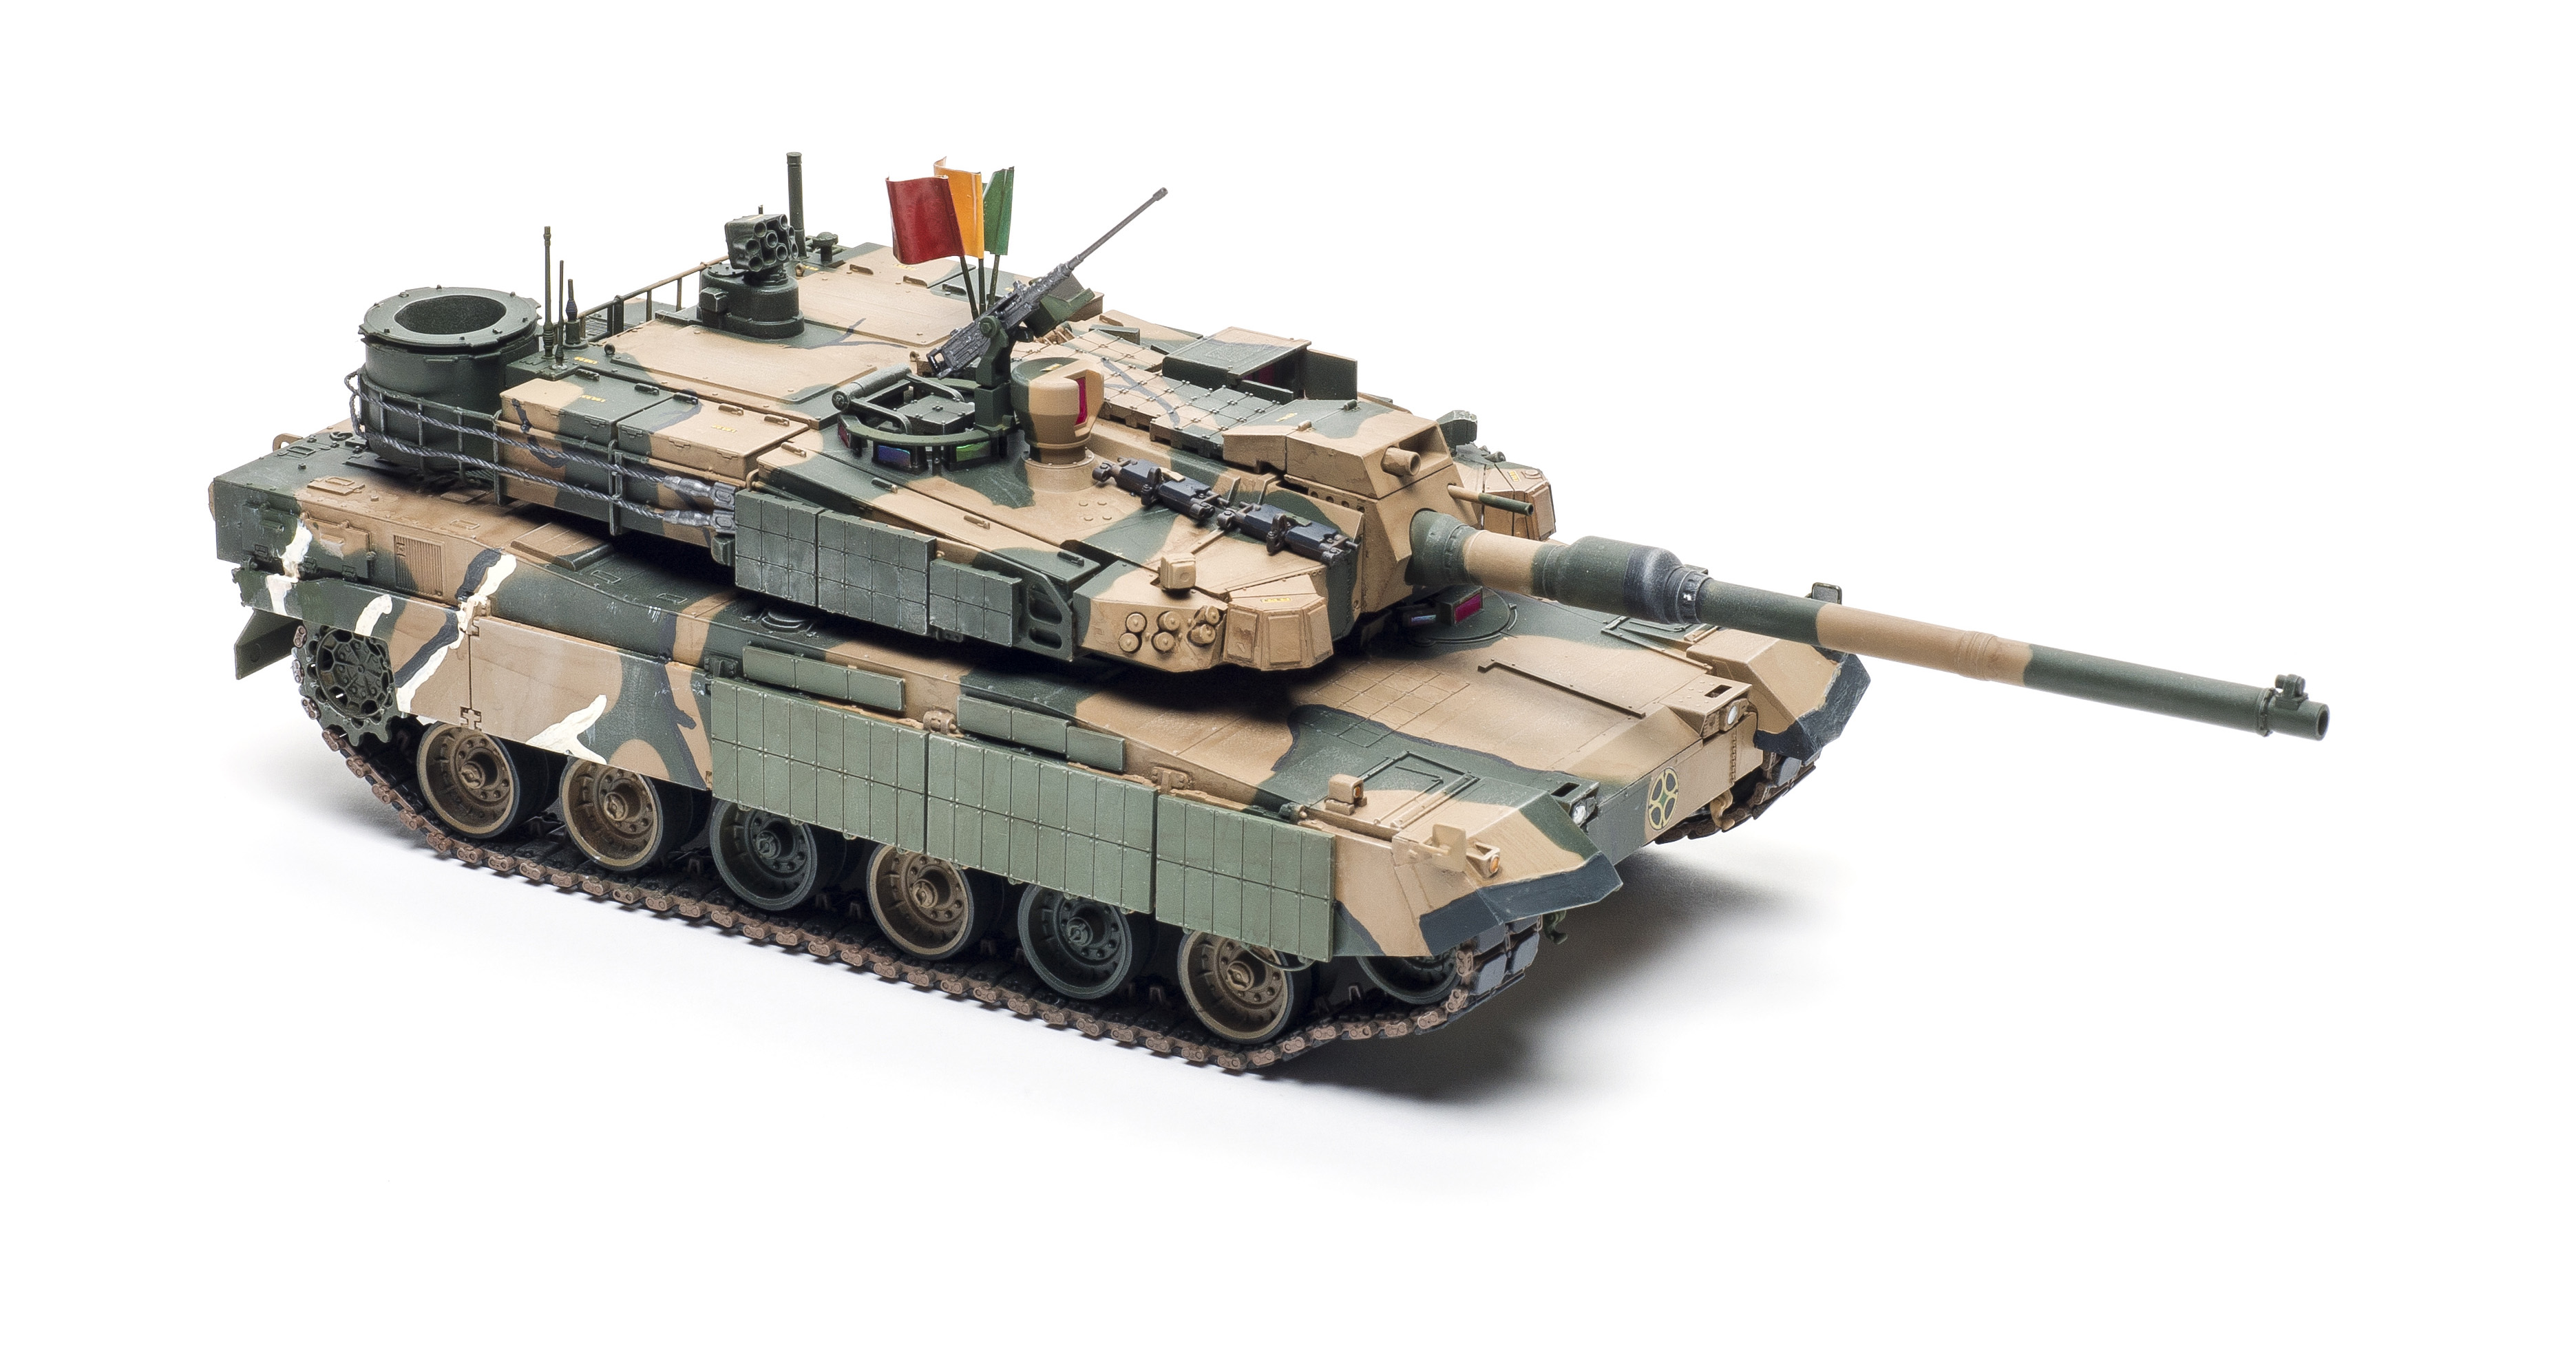 Academy K2 Black Panther new scale model kit build review